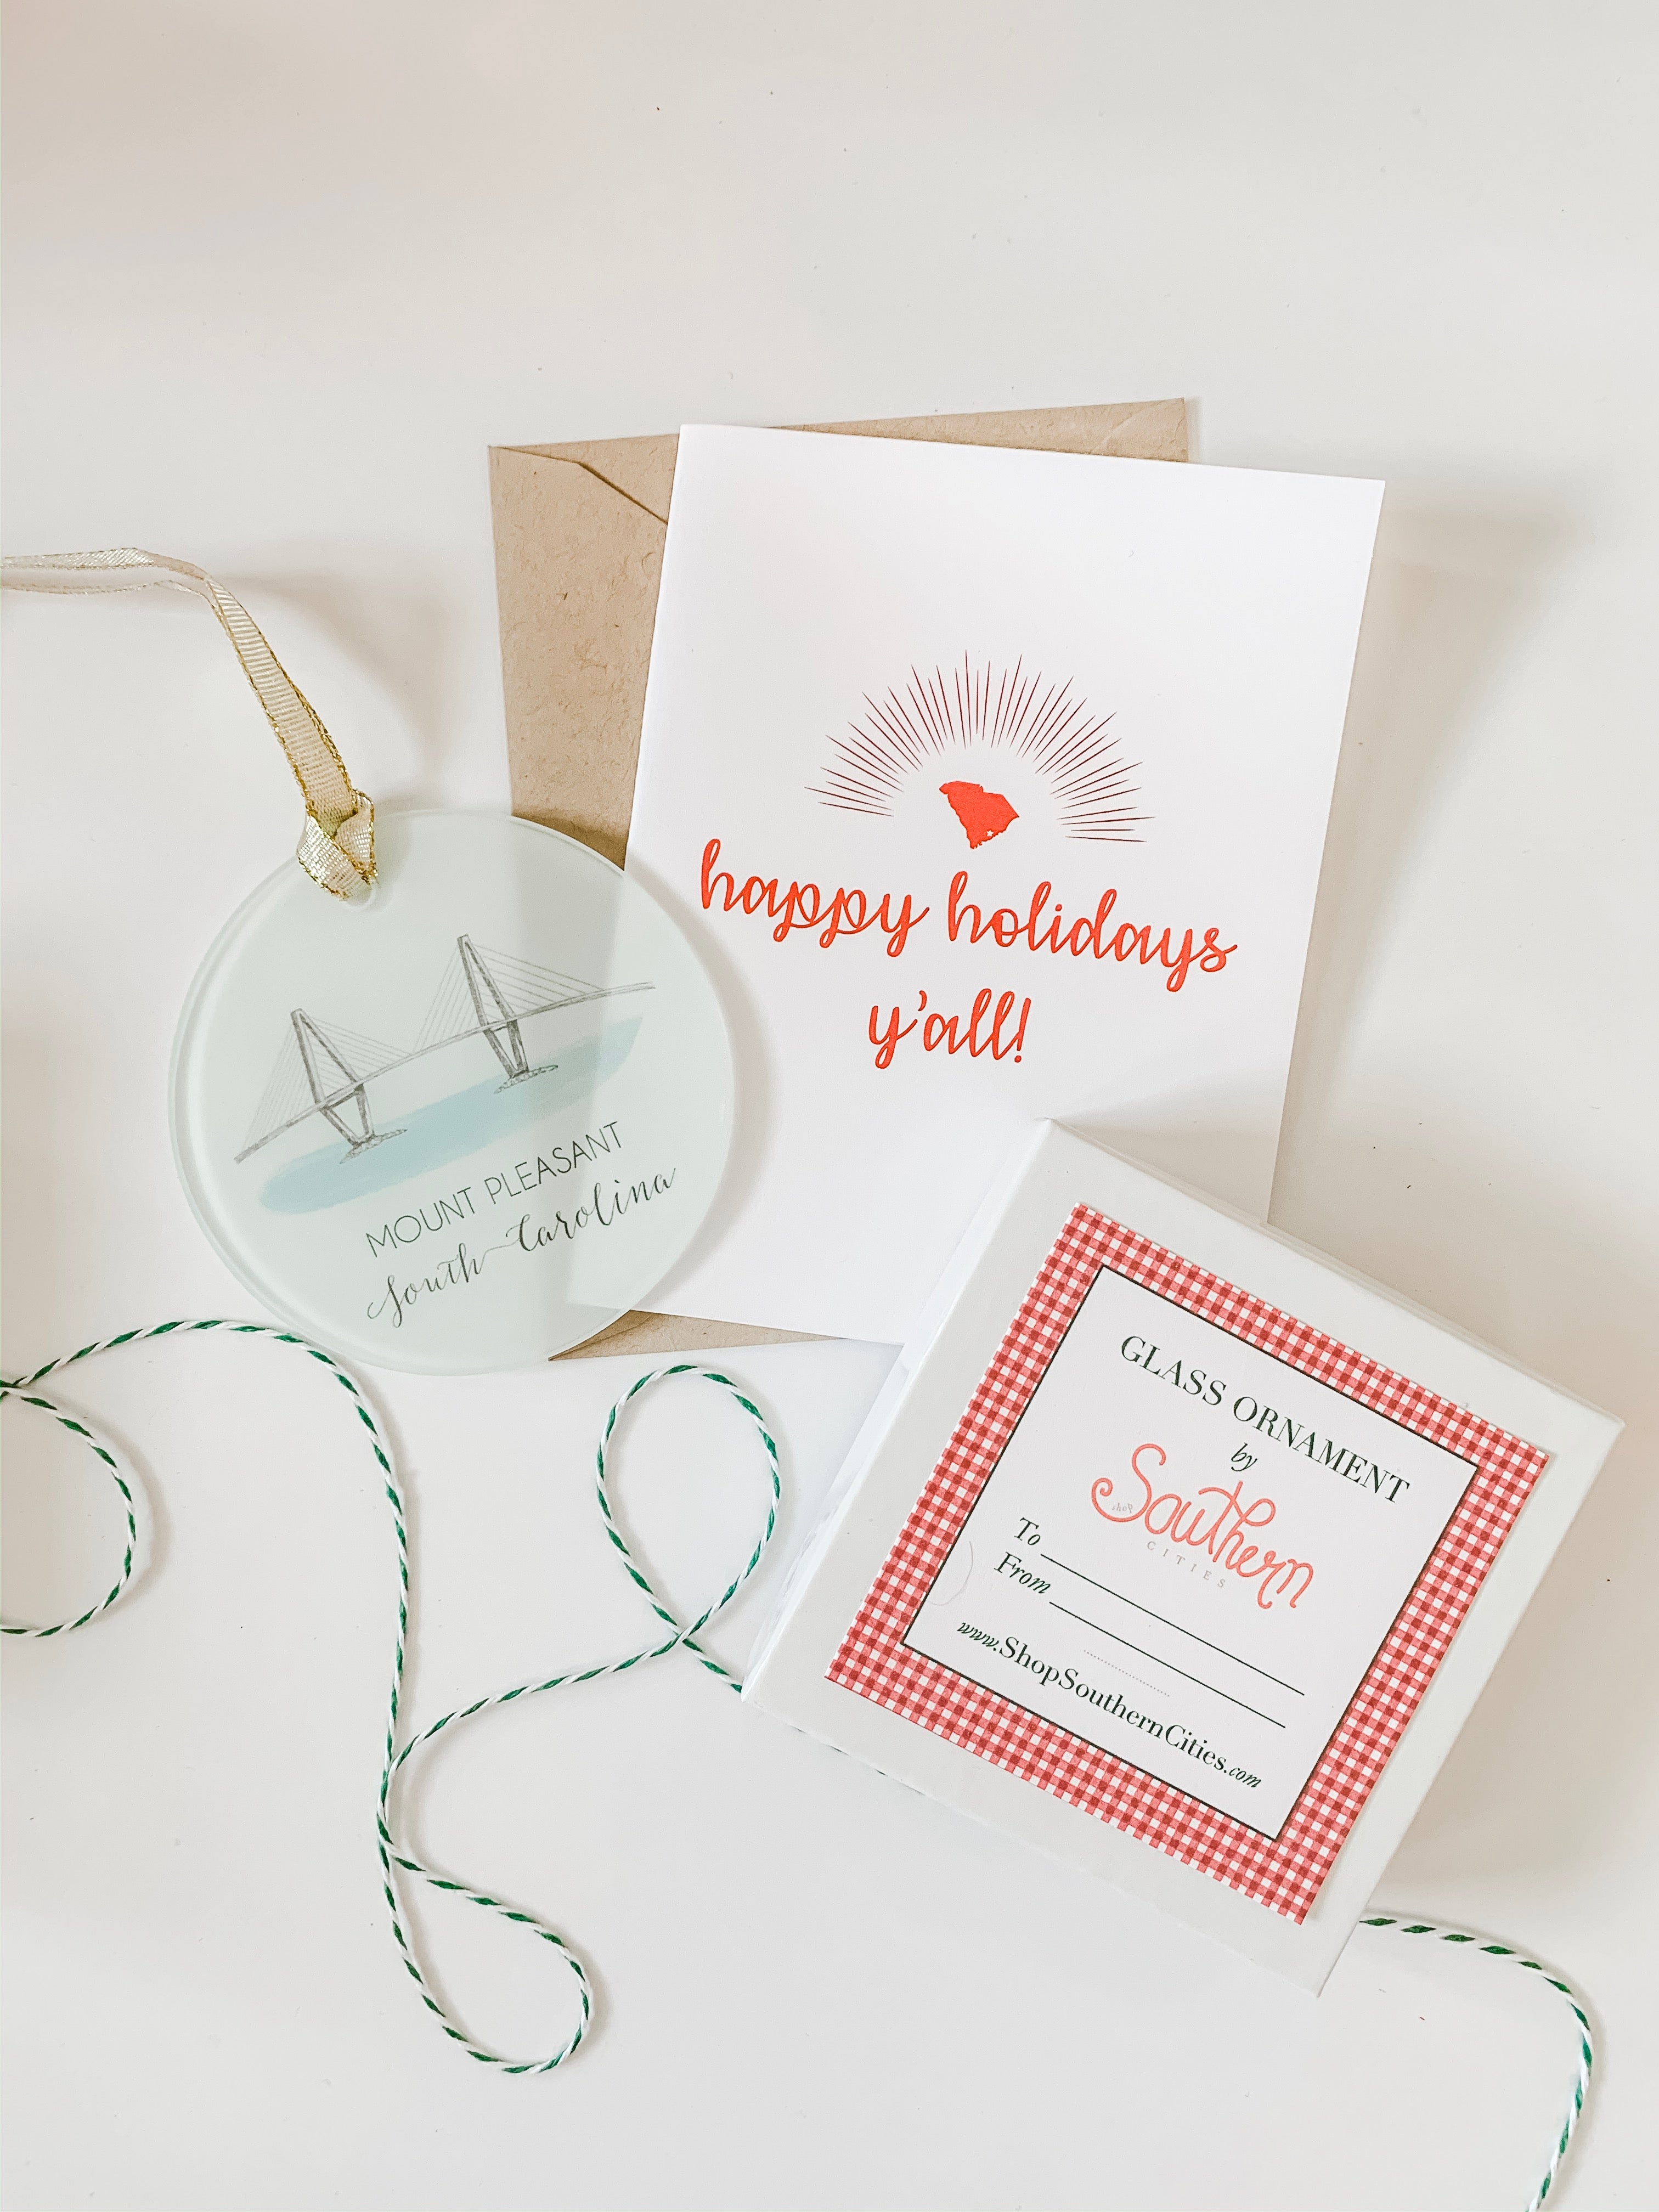 Christmas cards are a wonderful way to stay connected to friends and family.